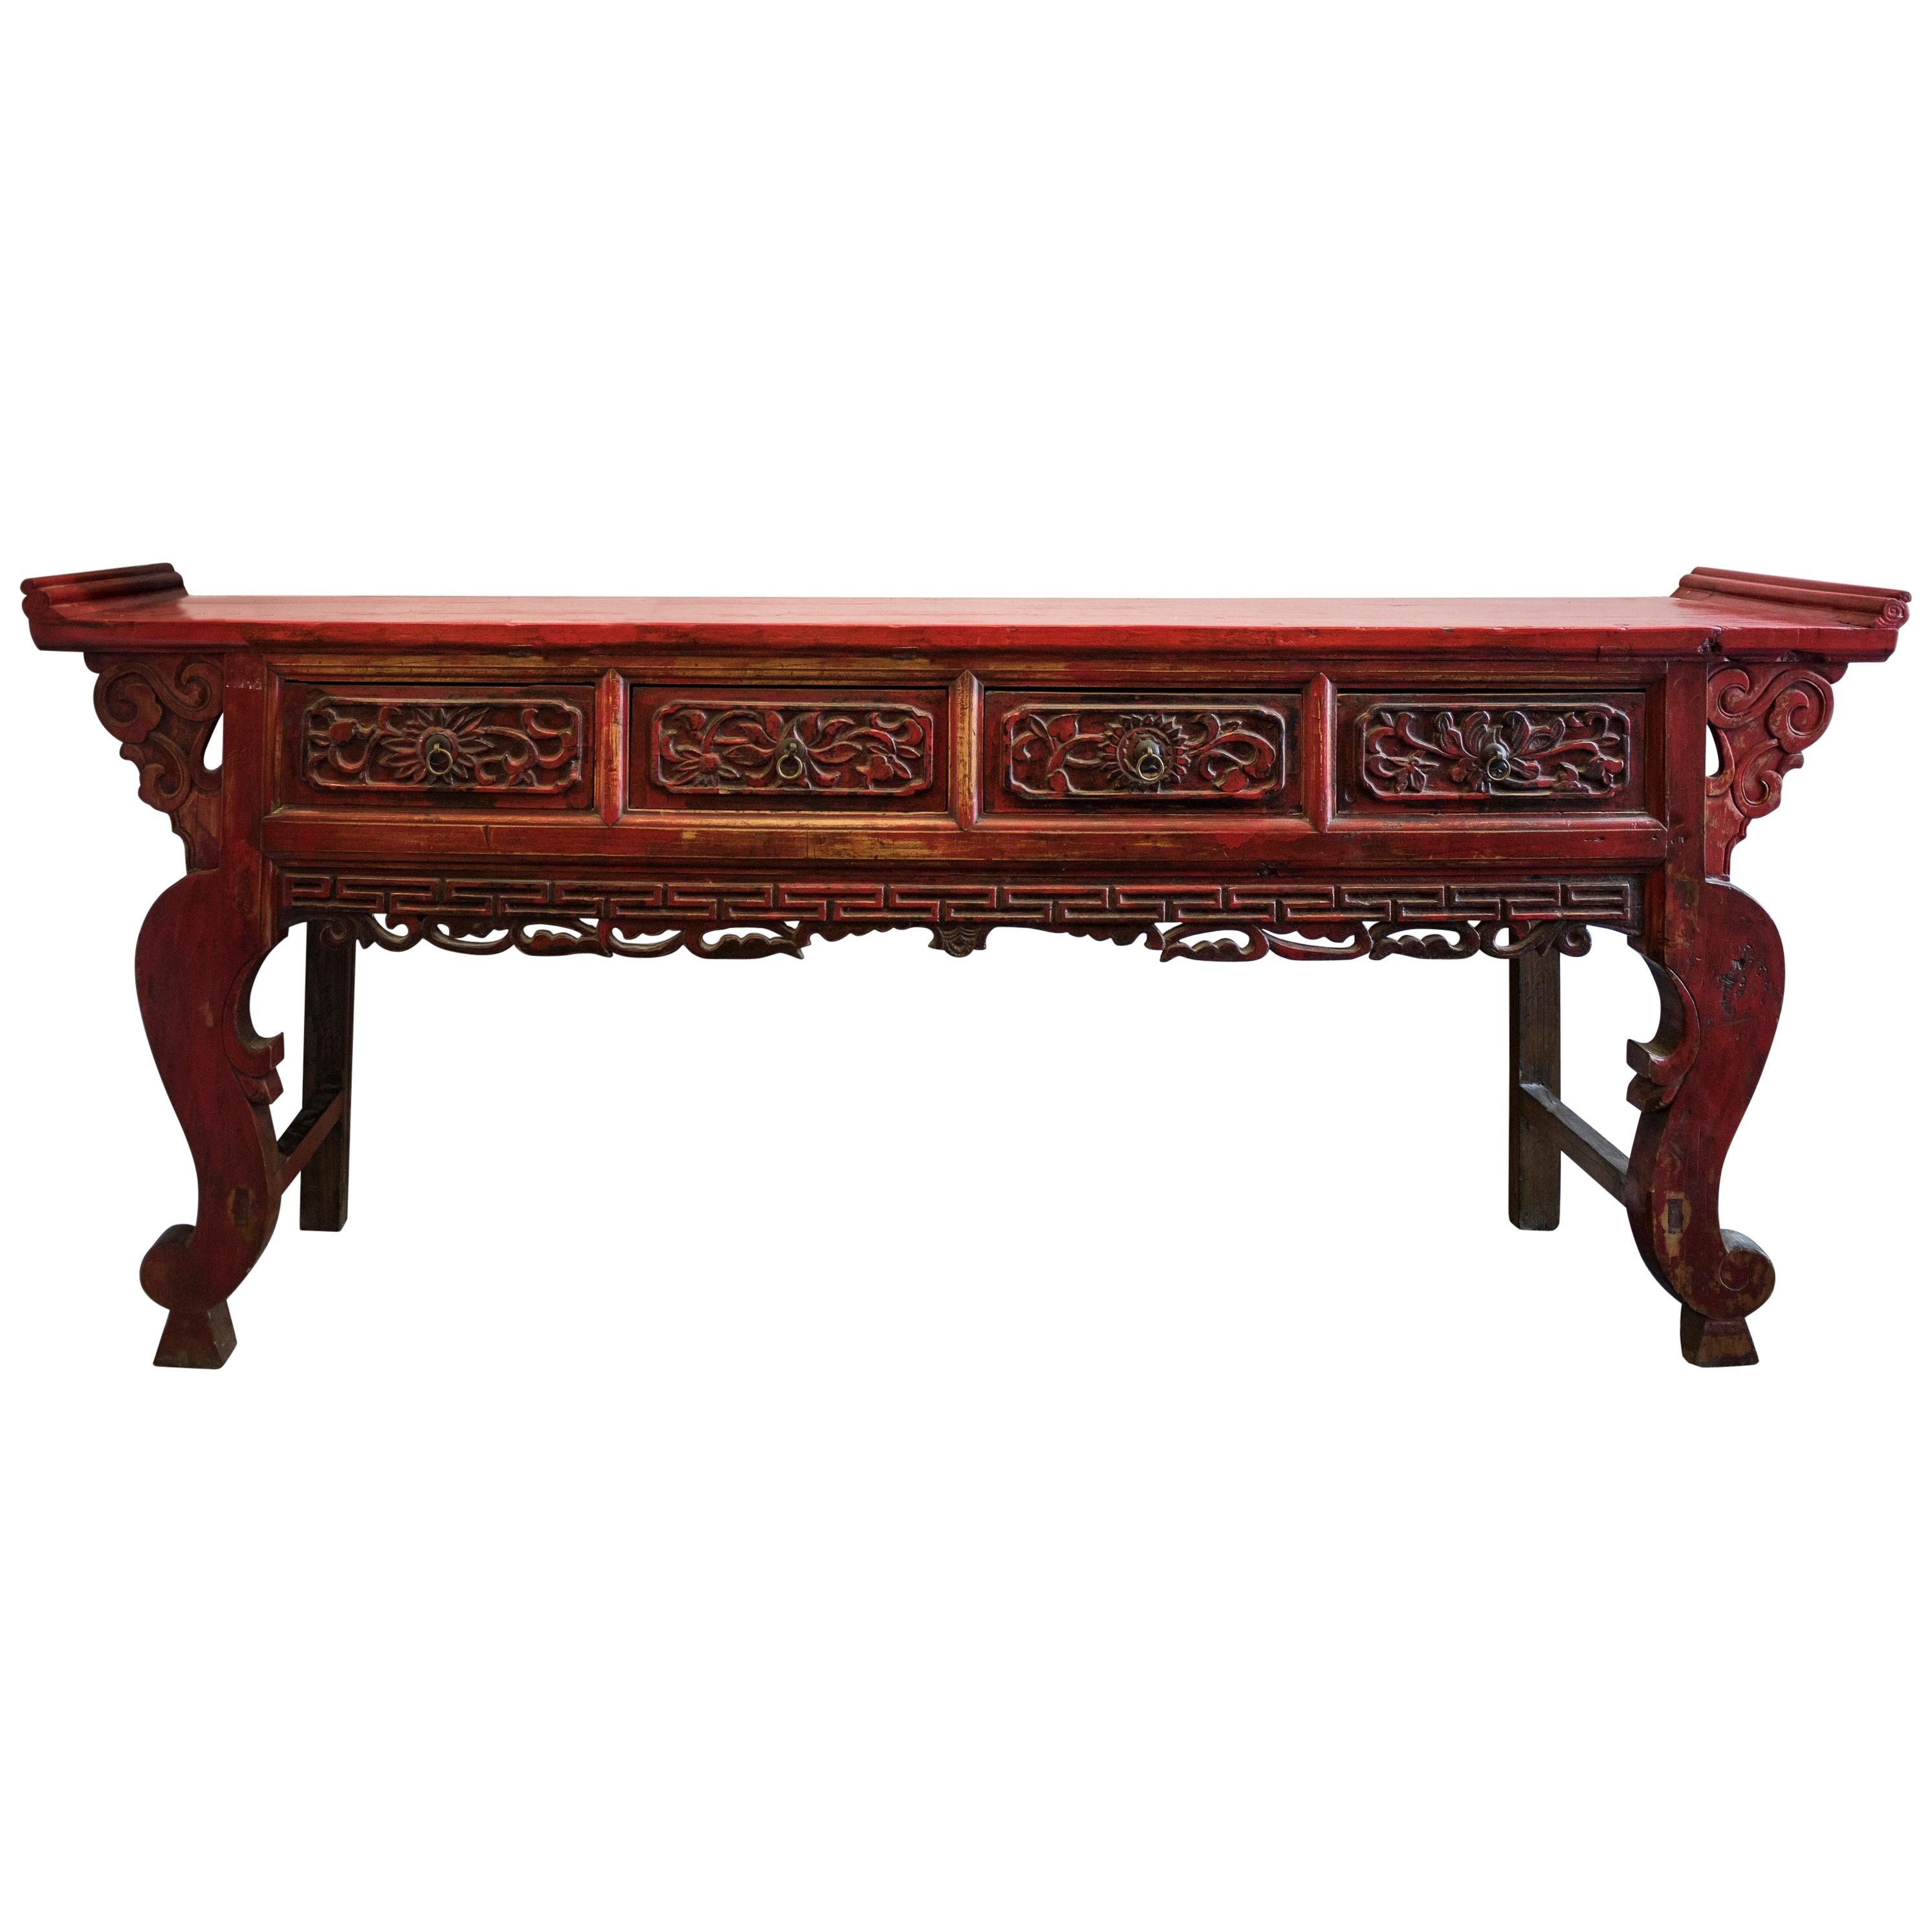 19th Century Red Lacquered and Carved Chinese Console